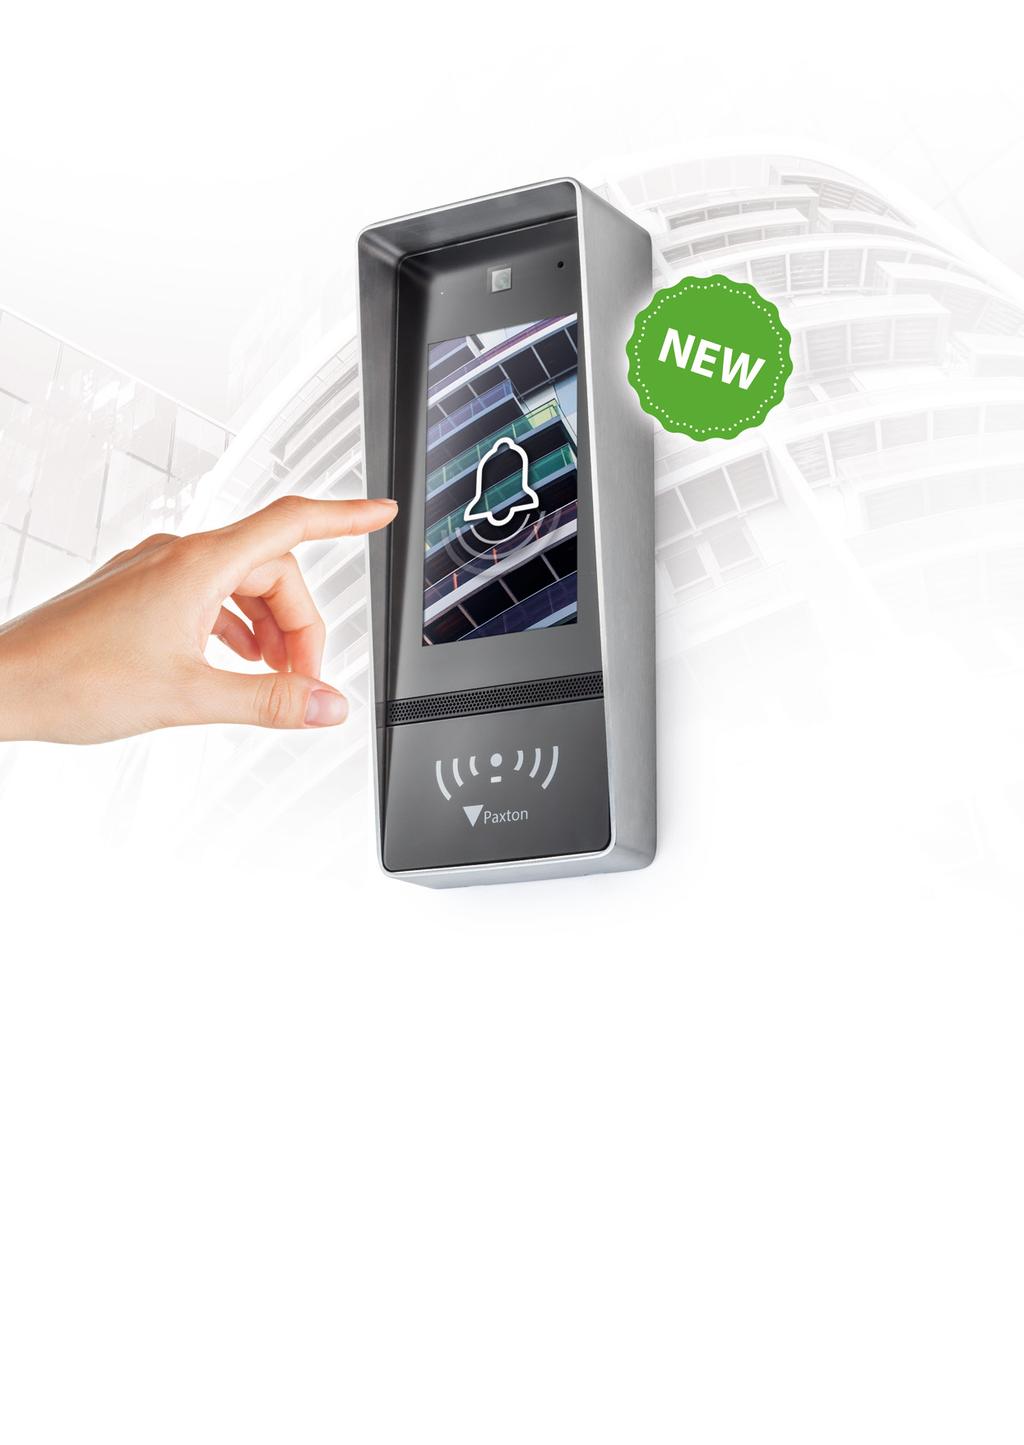 Net2 Entry Touch Smart, Simple Door Entry with a Premium Touch Net2 Entry Touch panel is the latest addition to our door entry range, compatible with Net2 access control.